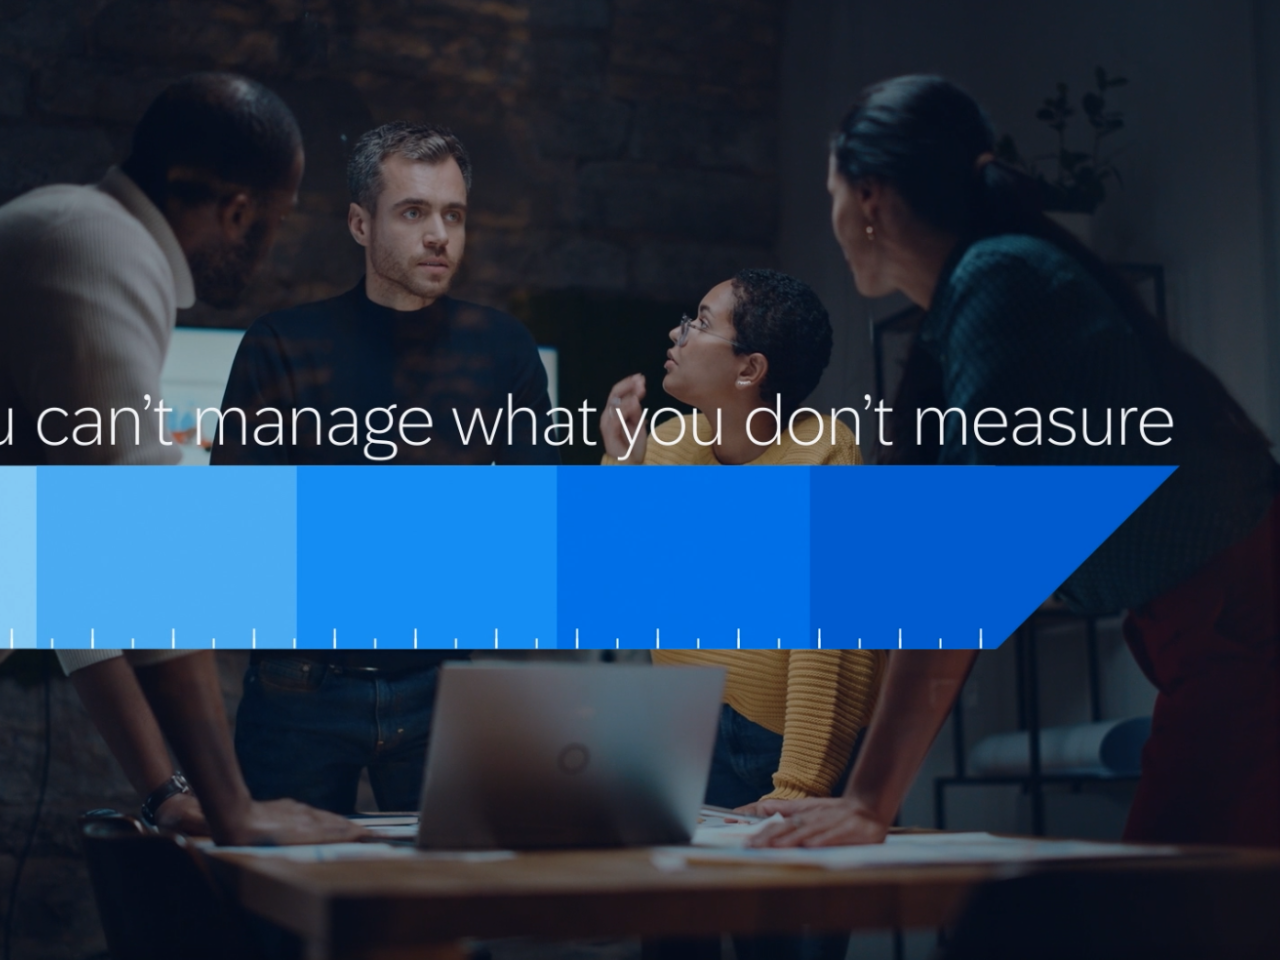 "you can't manage what you don't measure"